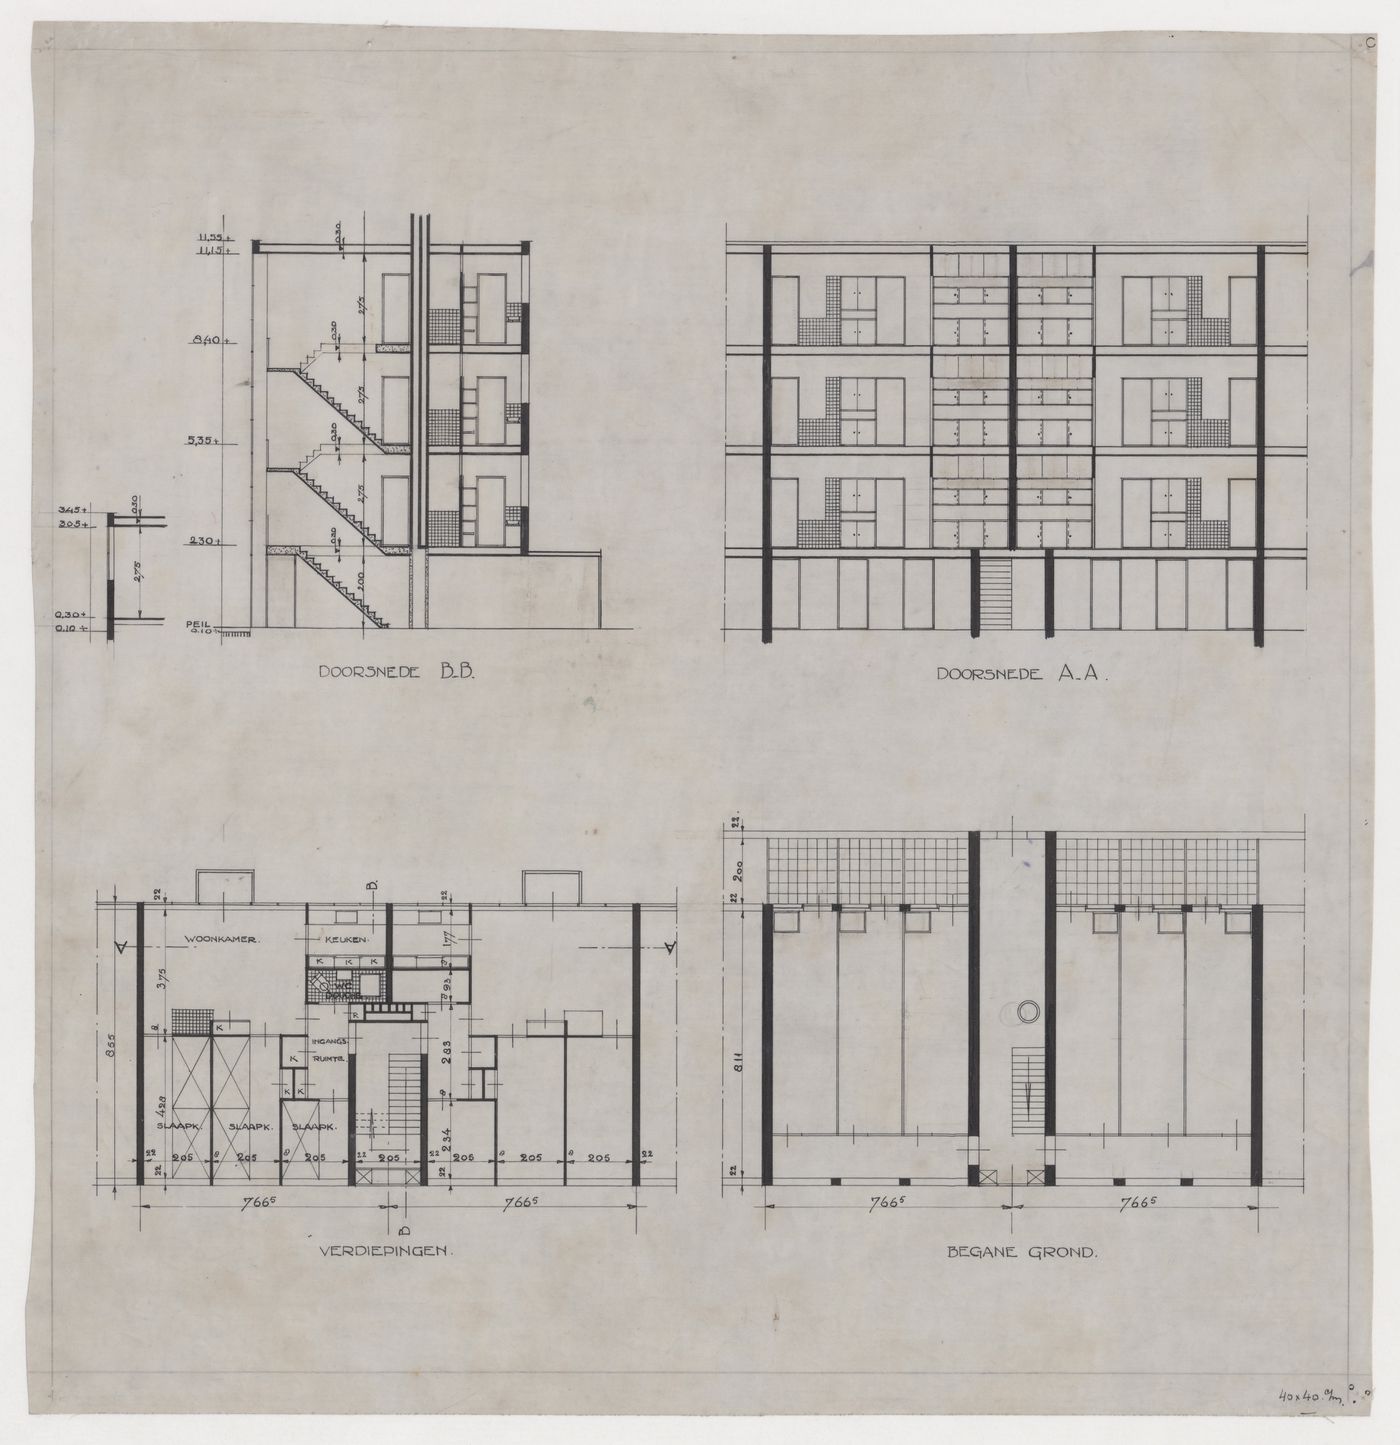 Ground and first floor plans and sections for two housing units for Blijdorp Workers' Housing Quarter, Rotterdam, Netherlands